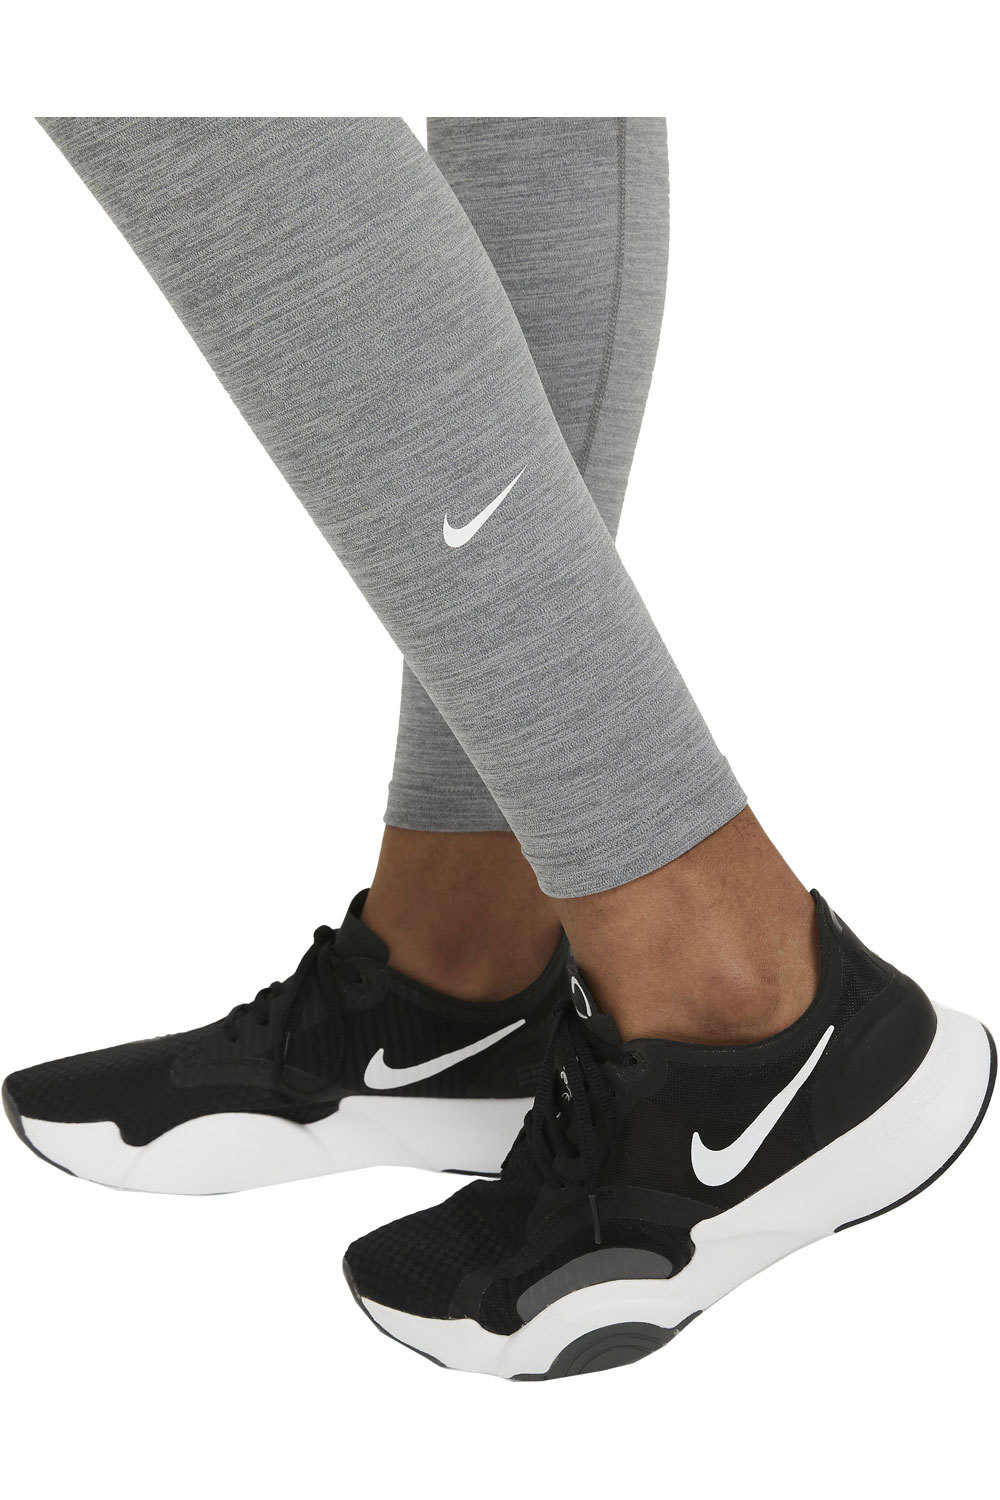 Nike pantalones y mallas largas fitness mujer W NK ONE DF MR TGT 03